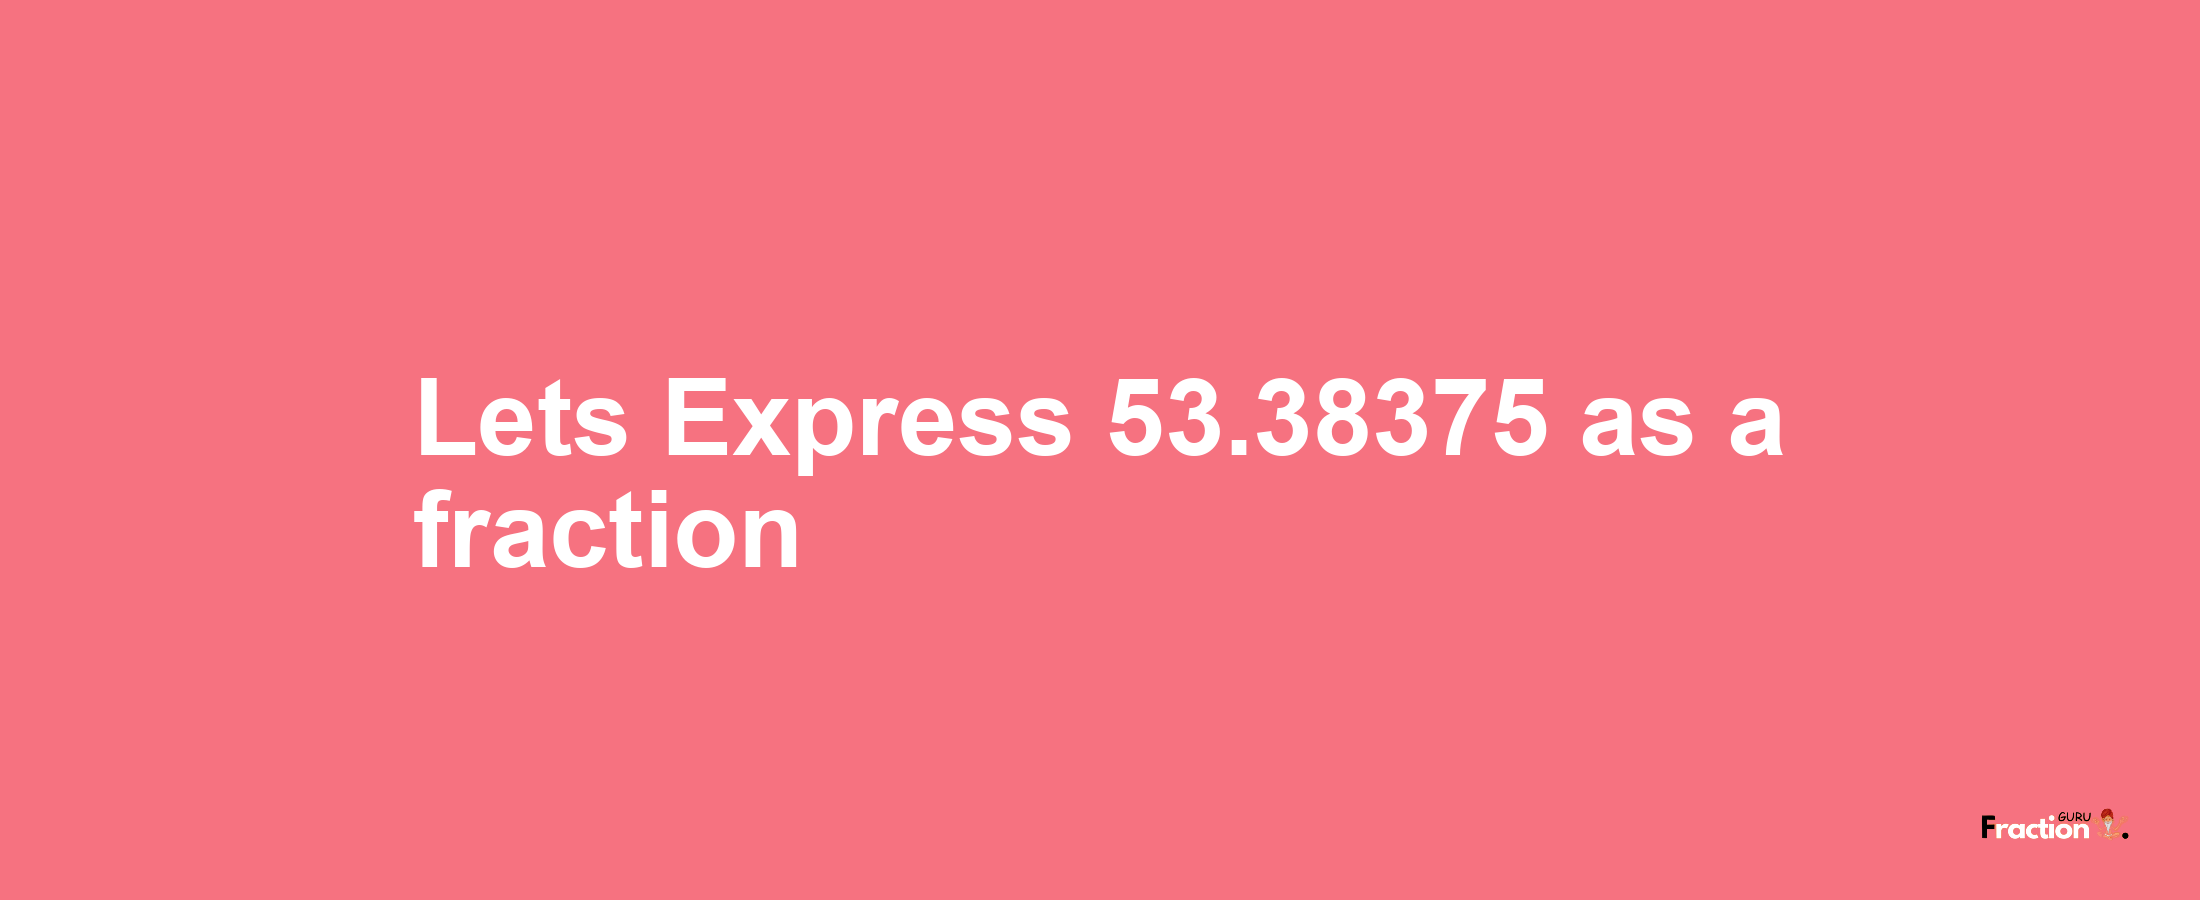 Lets Express 53.38375 as afraction